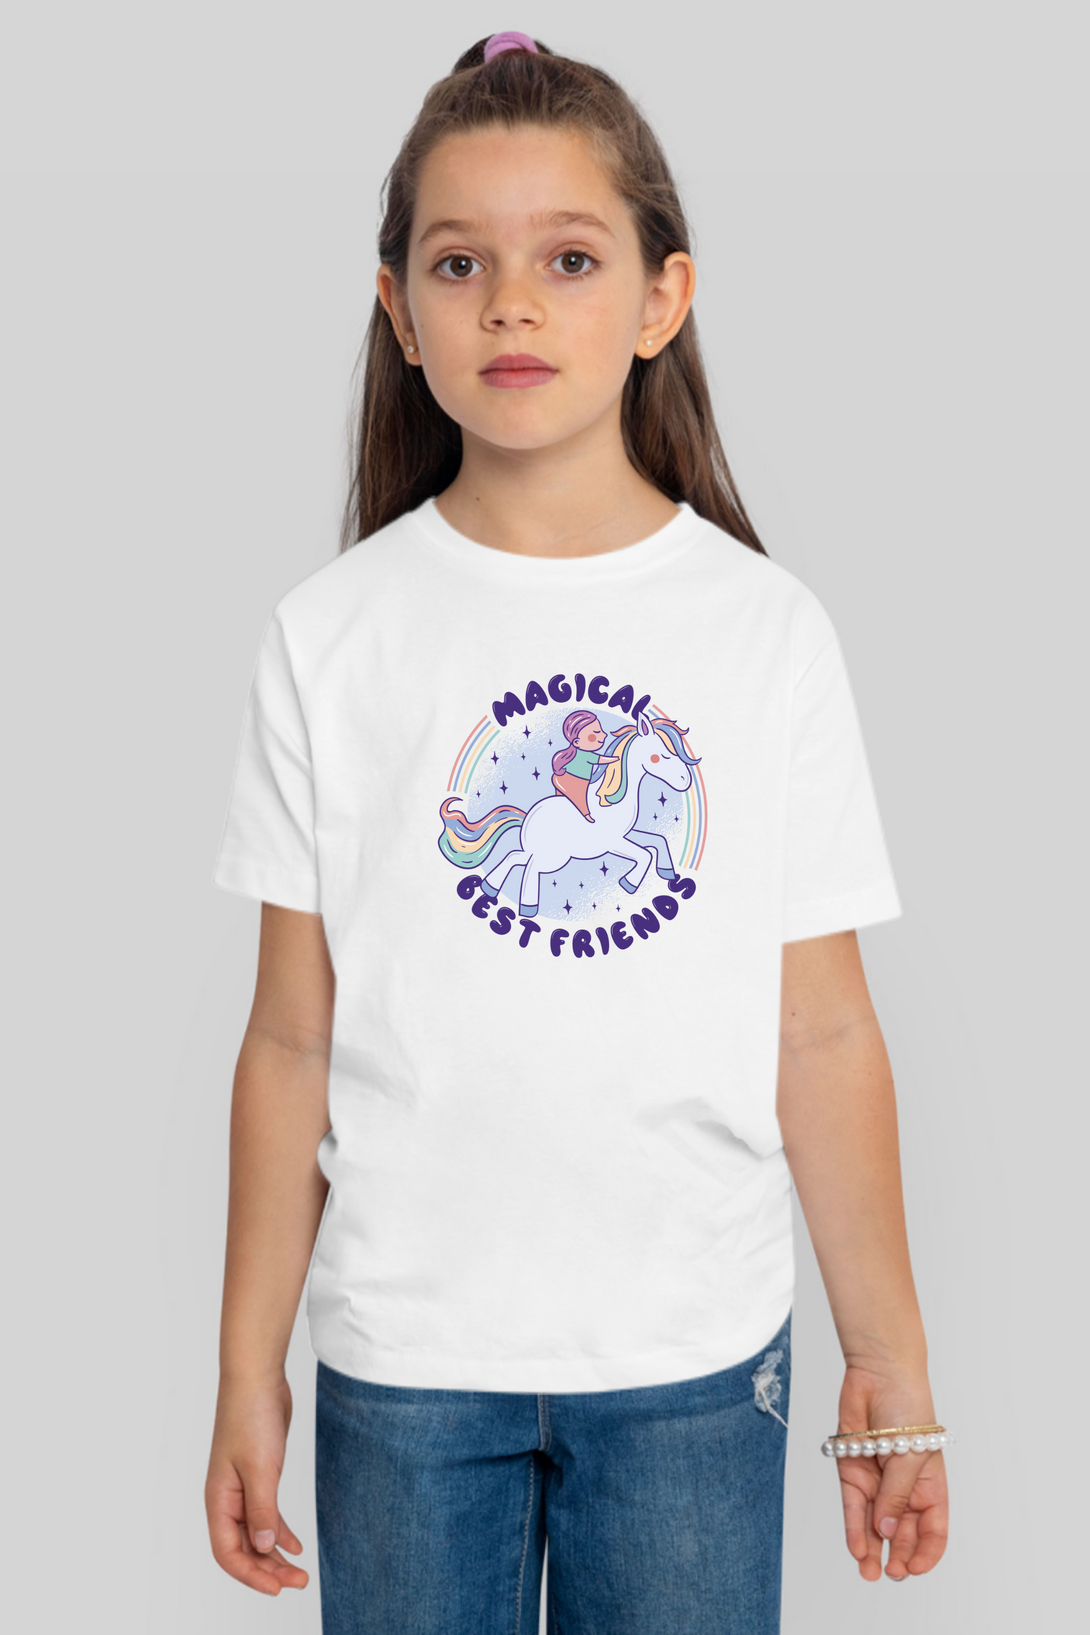 Magical Friend Printed T-Shirt For Girl - WowWaves - 10